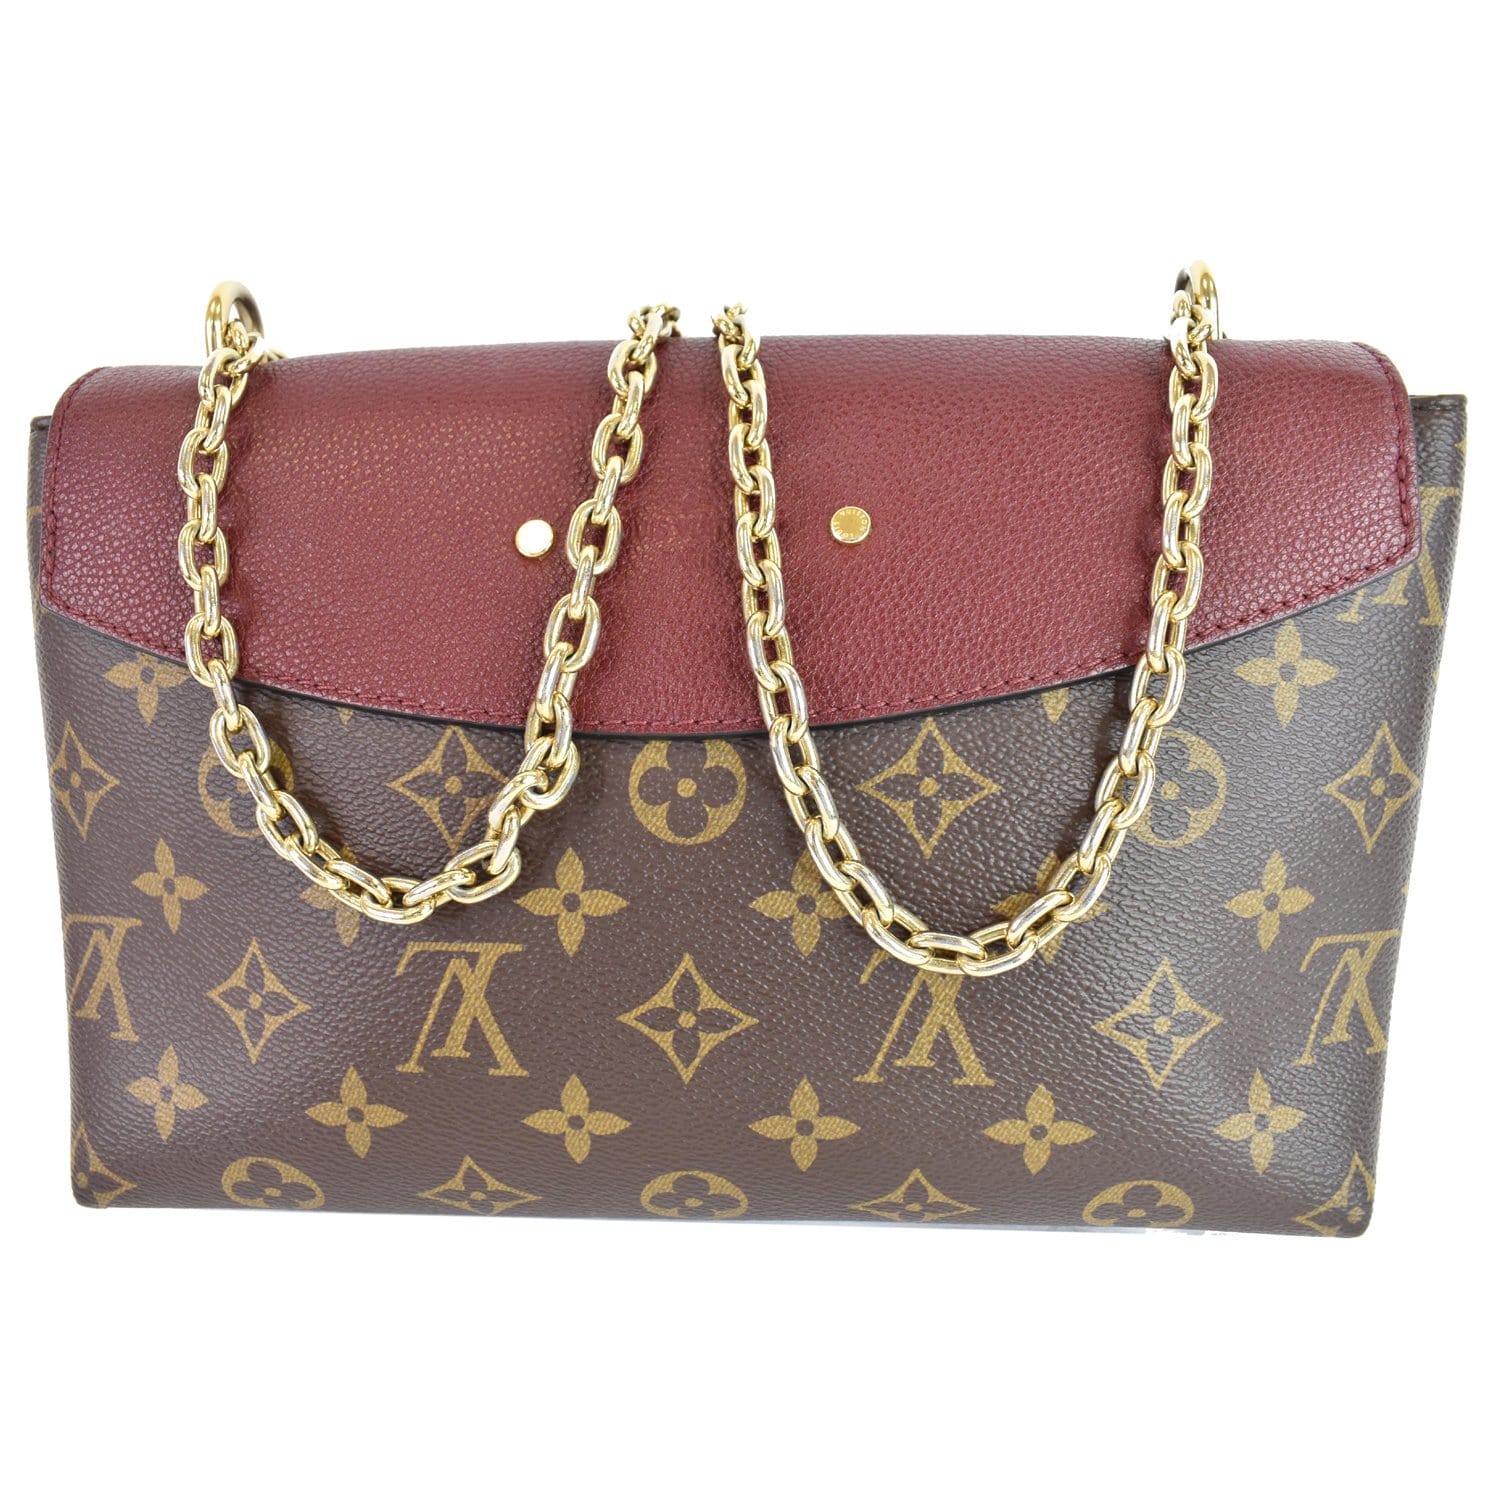 LOUIS VUITTON SAINT-PLACIDE /What Can it fit and mini REVIEW! 